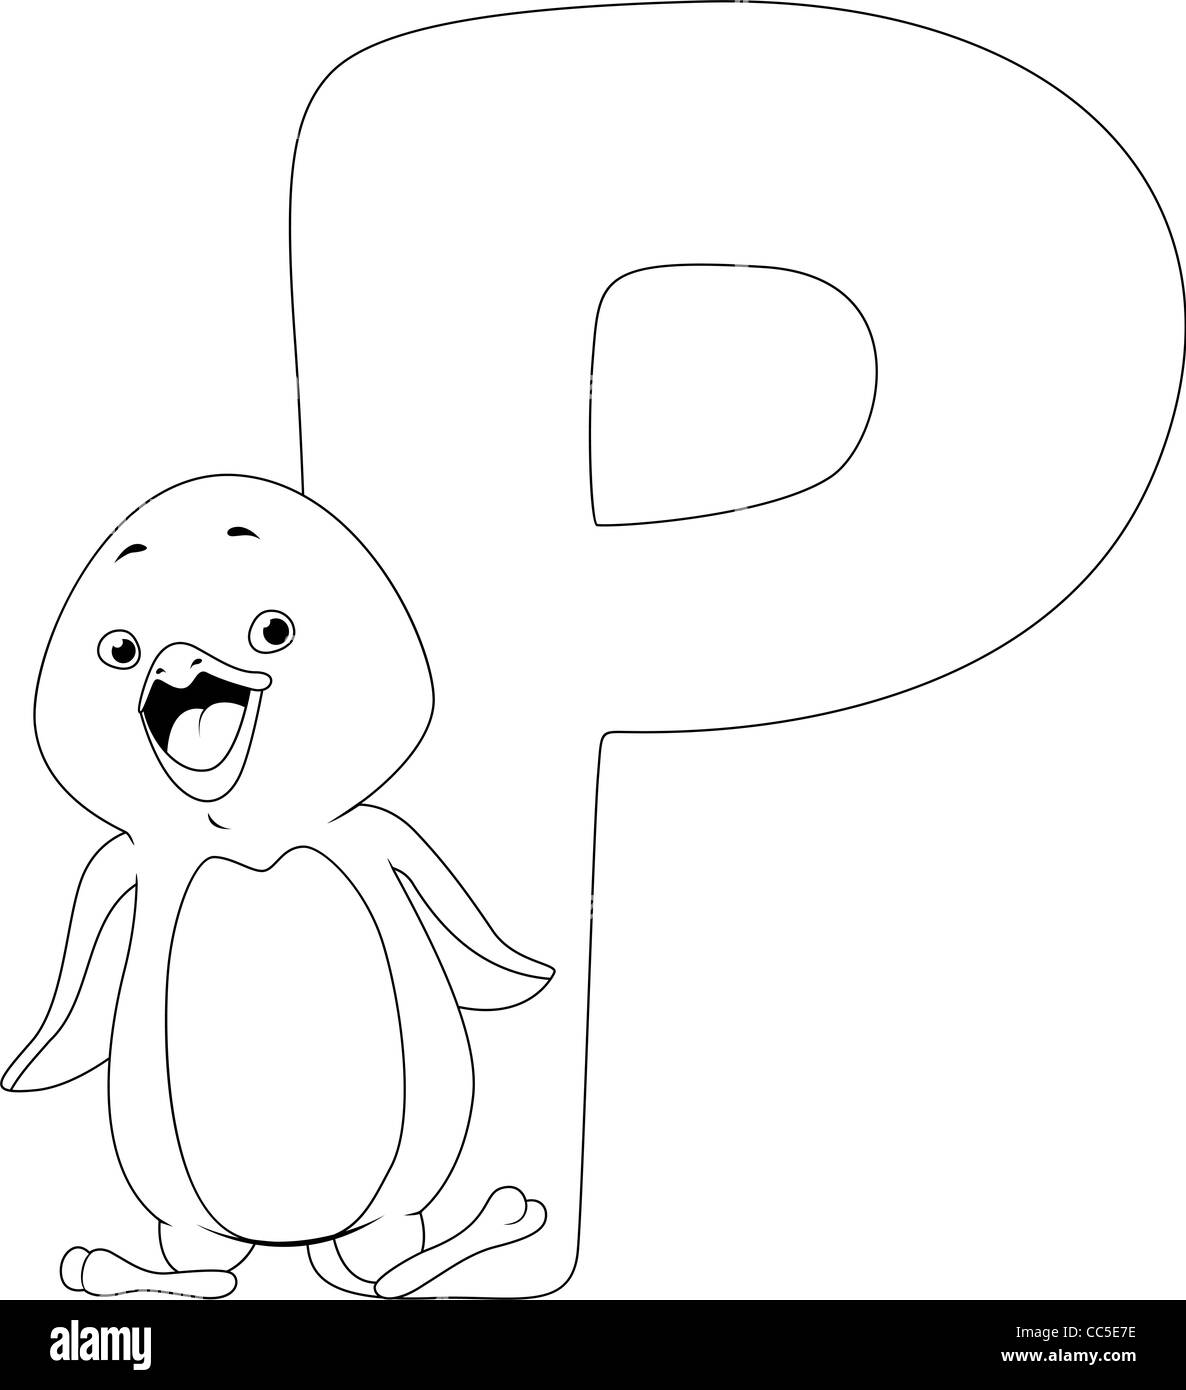 Coloring Page Illustration Featuring a Penguin Stock Photo